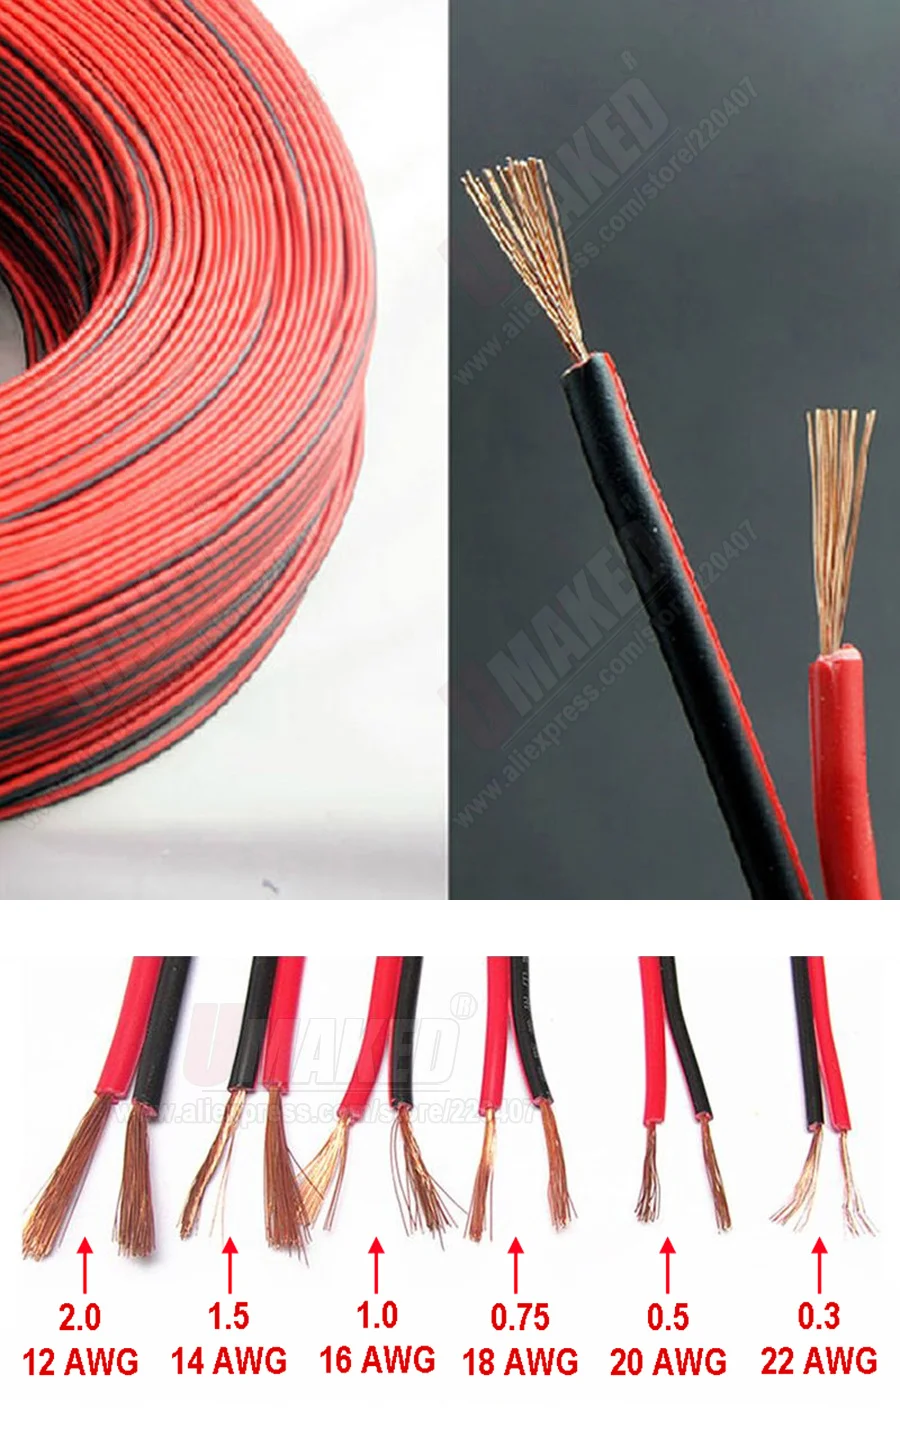 20AWG Copper Wire 2 Black and 2 Red Patch Cords 16 inch Tetra-Teknica TMA007 Alligator Clips Test Lead Set 